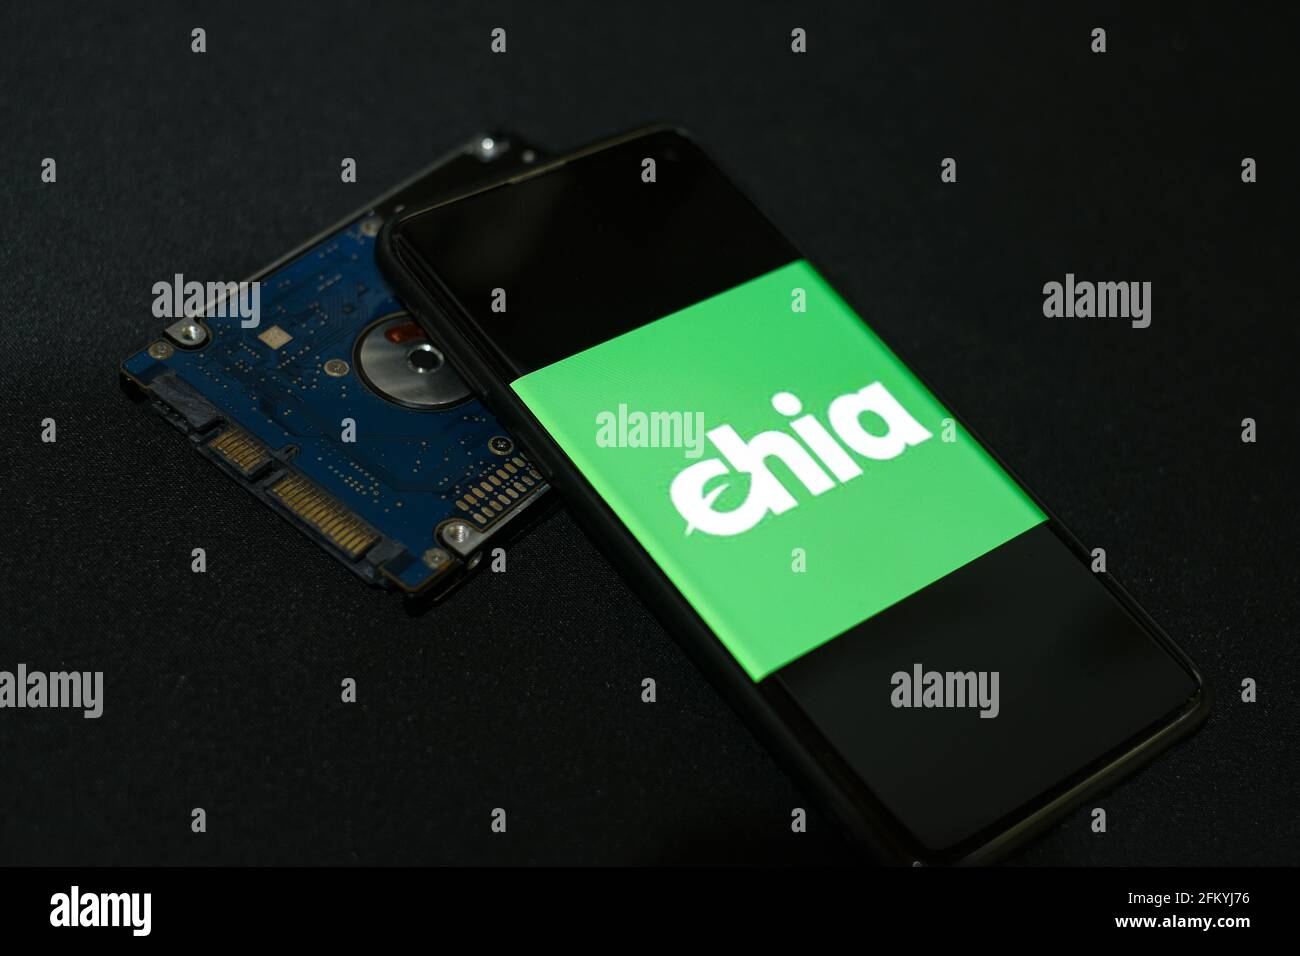 New green crypto currency Chia on a smartphone,hhd storage coin mining farming Stock Photo